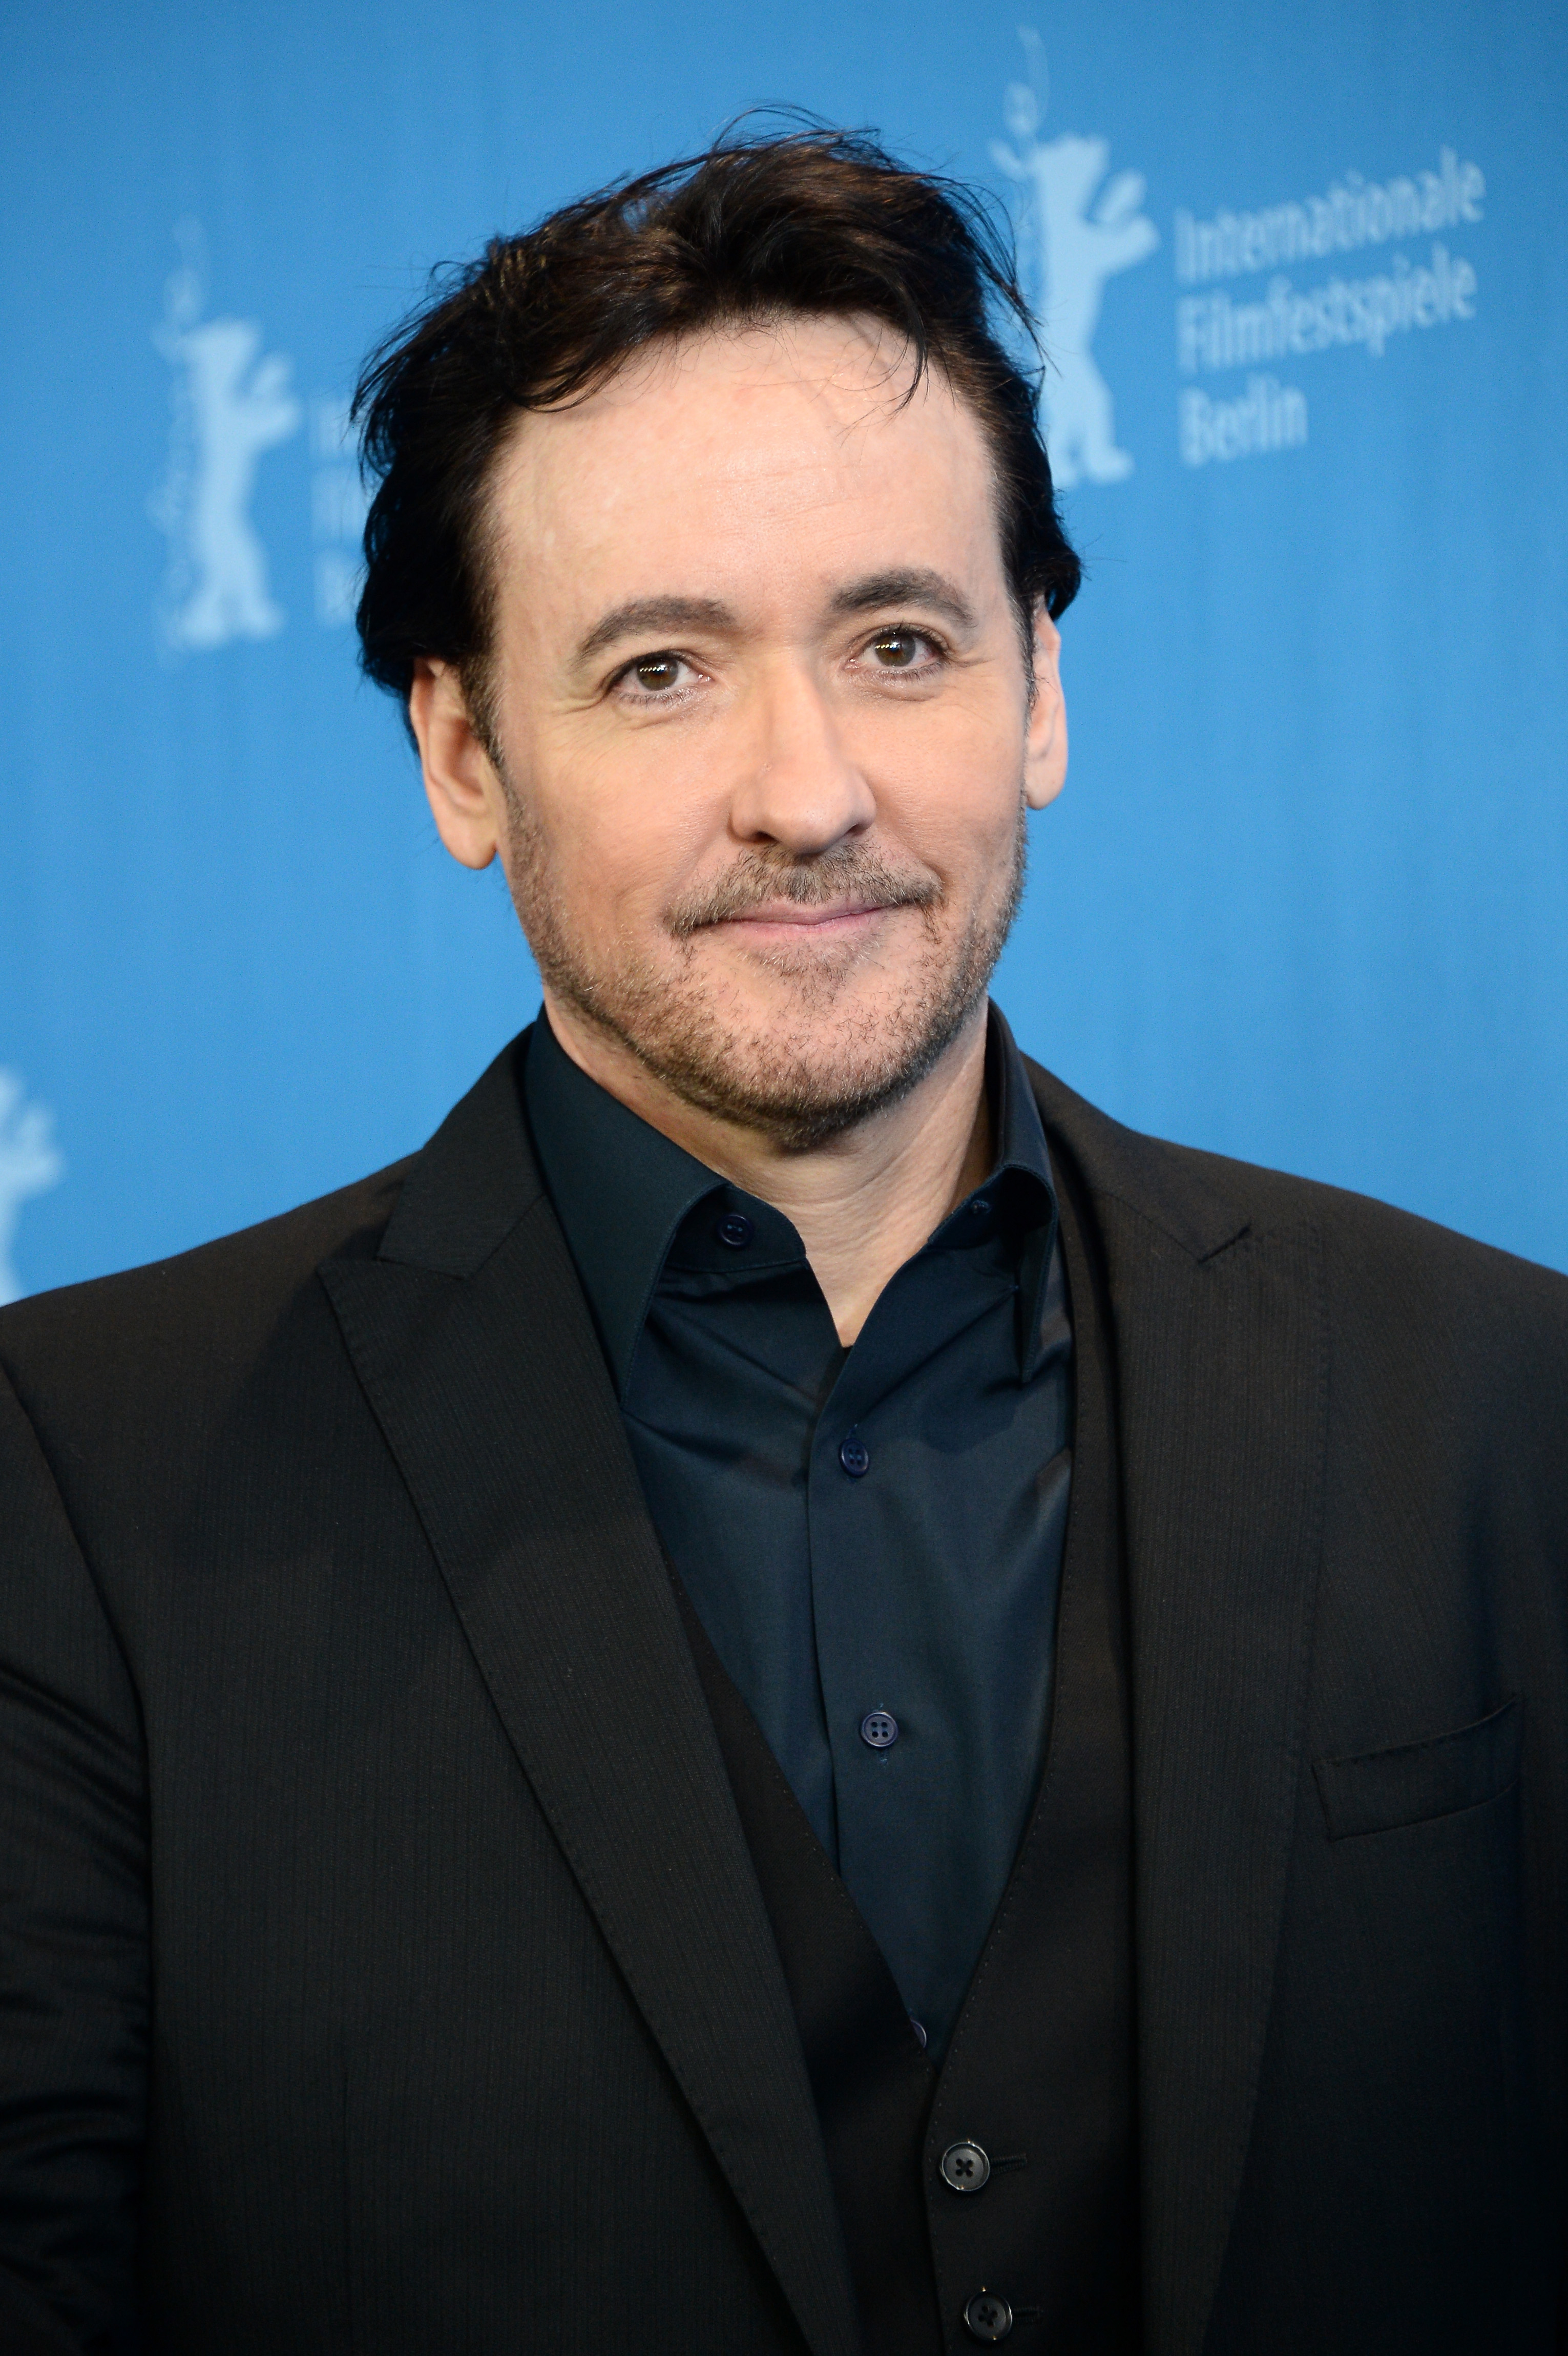 John Cusack in a dark suit and shirt poses in front of a backdrop at the Berlin International Film Festival